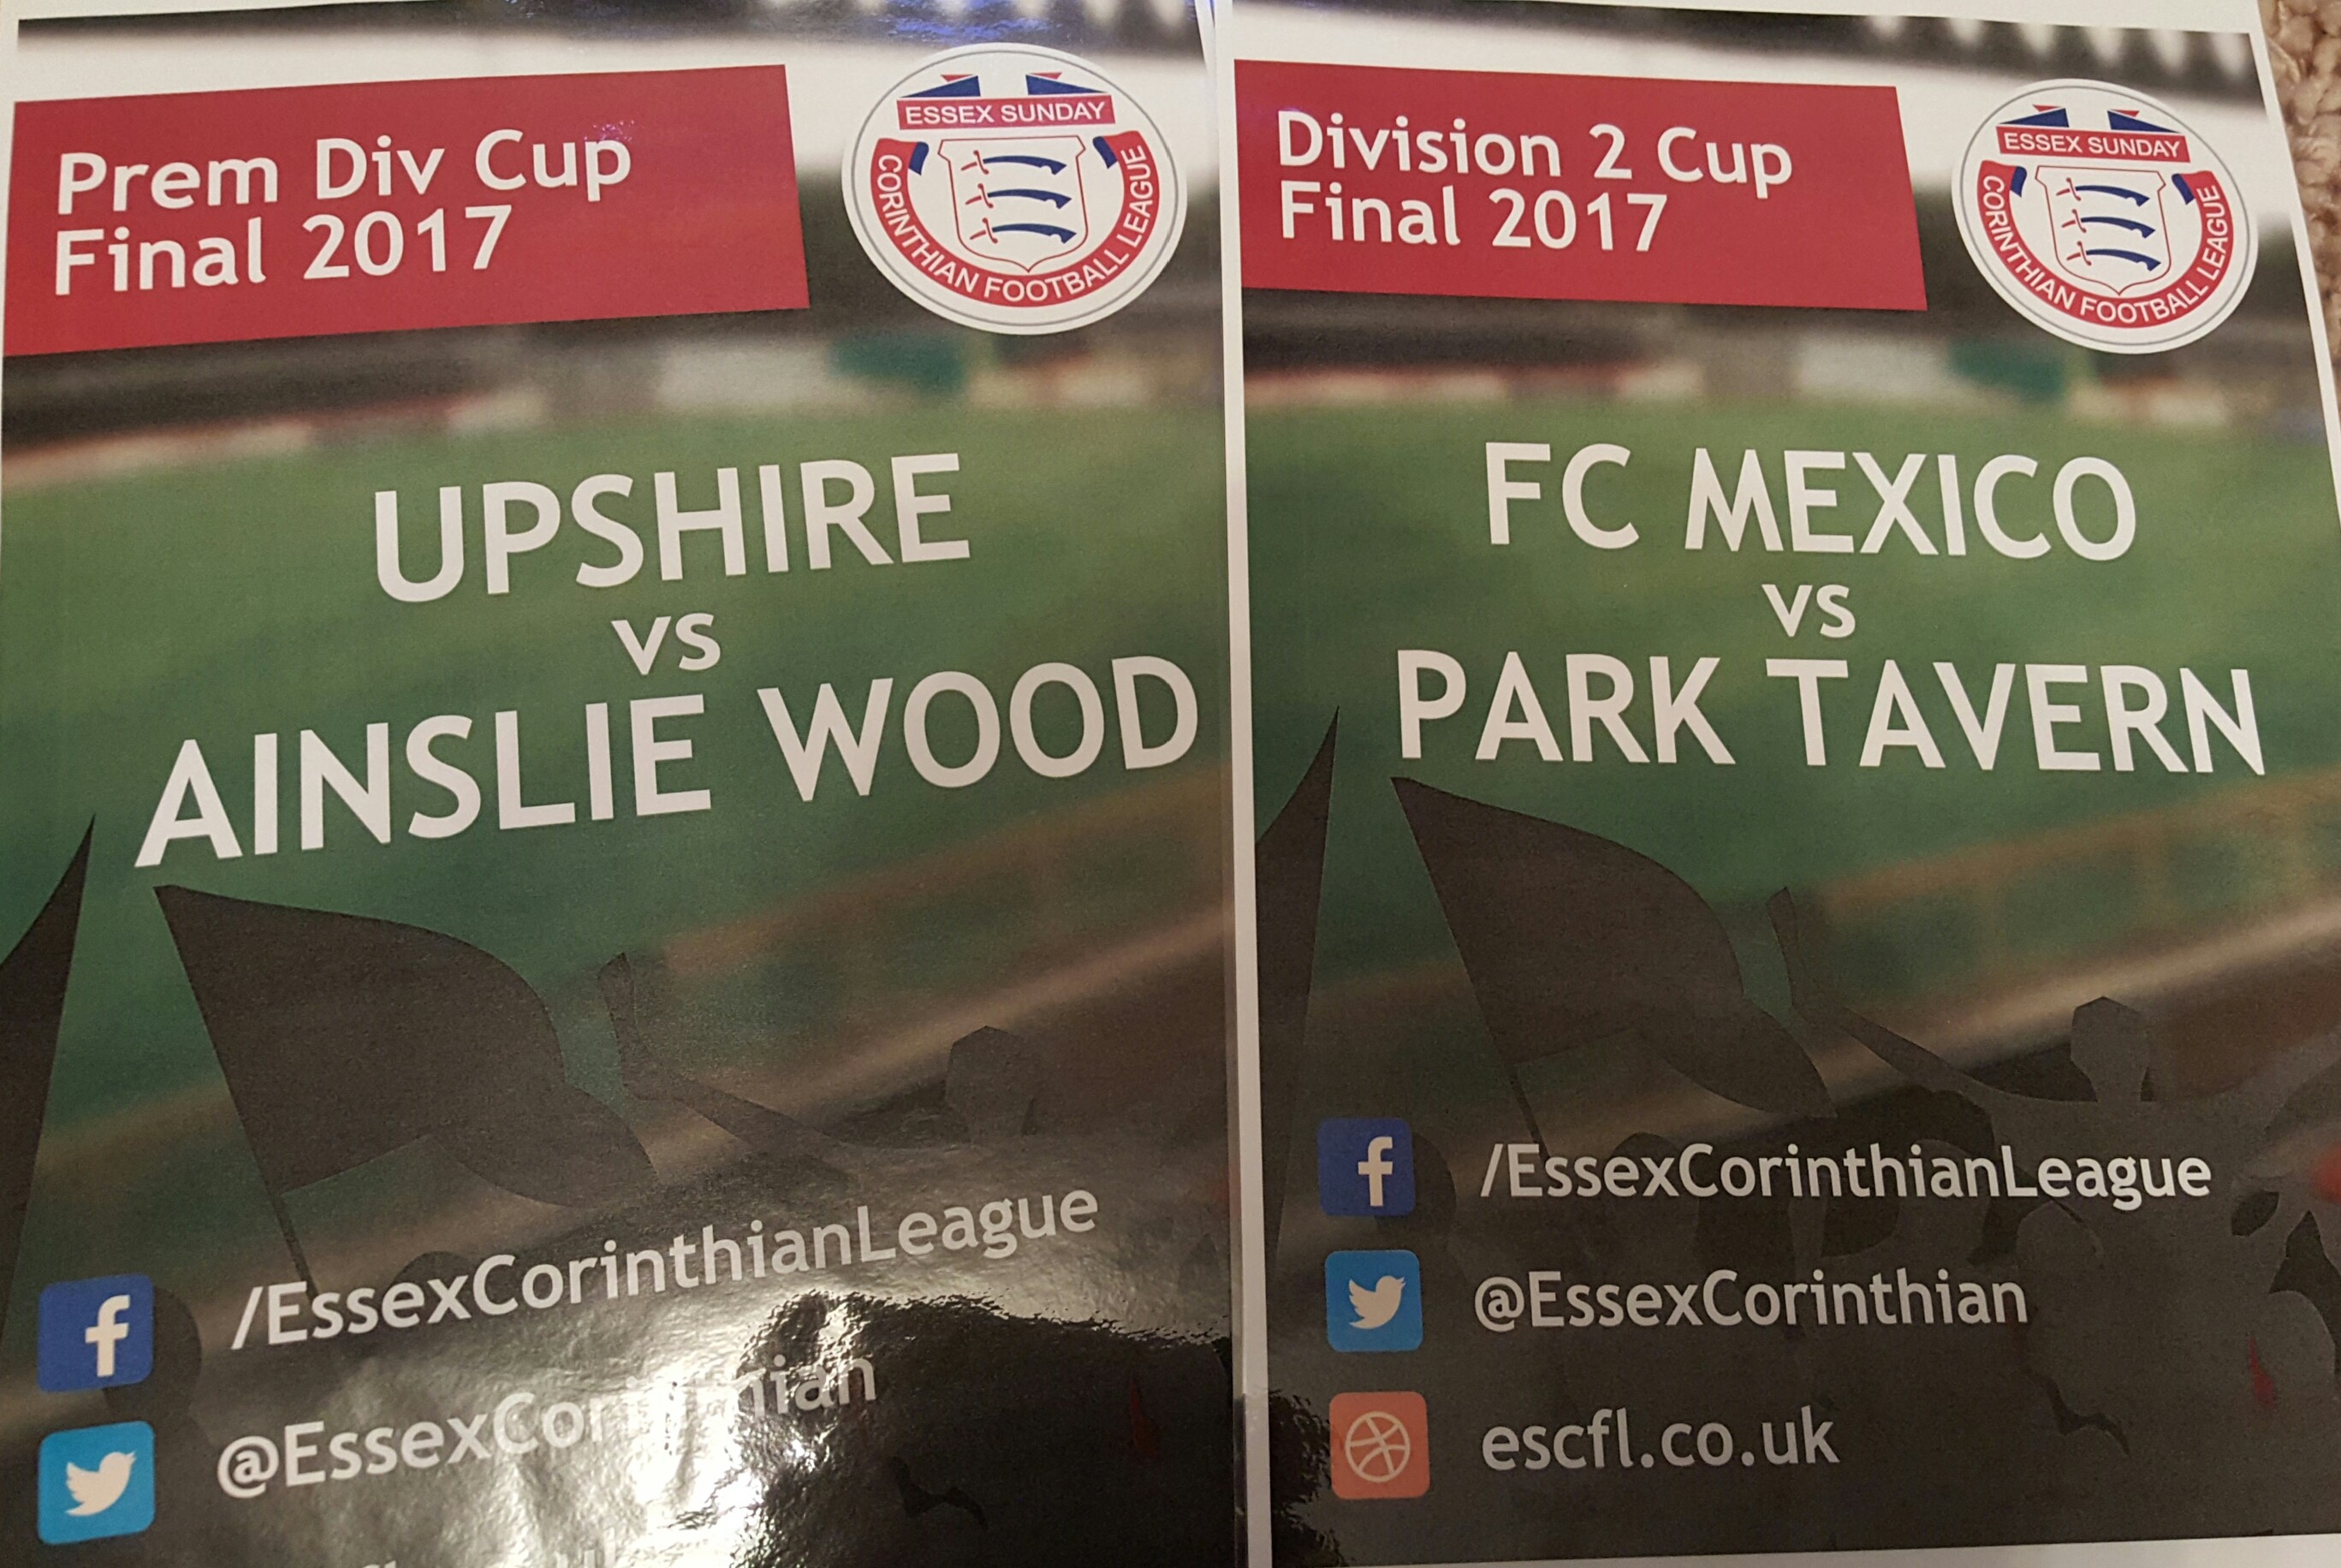 CUP FINAL PREVIEWS: Premier Division Cup and Division 2 Cup finals